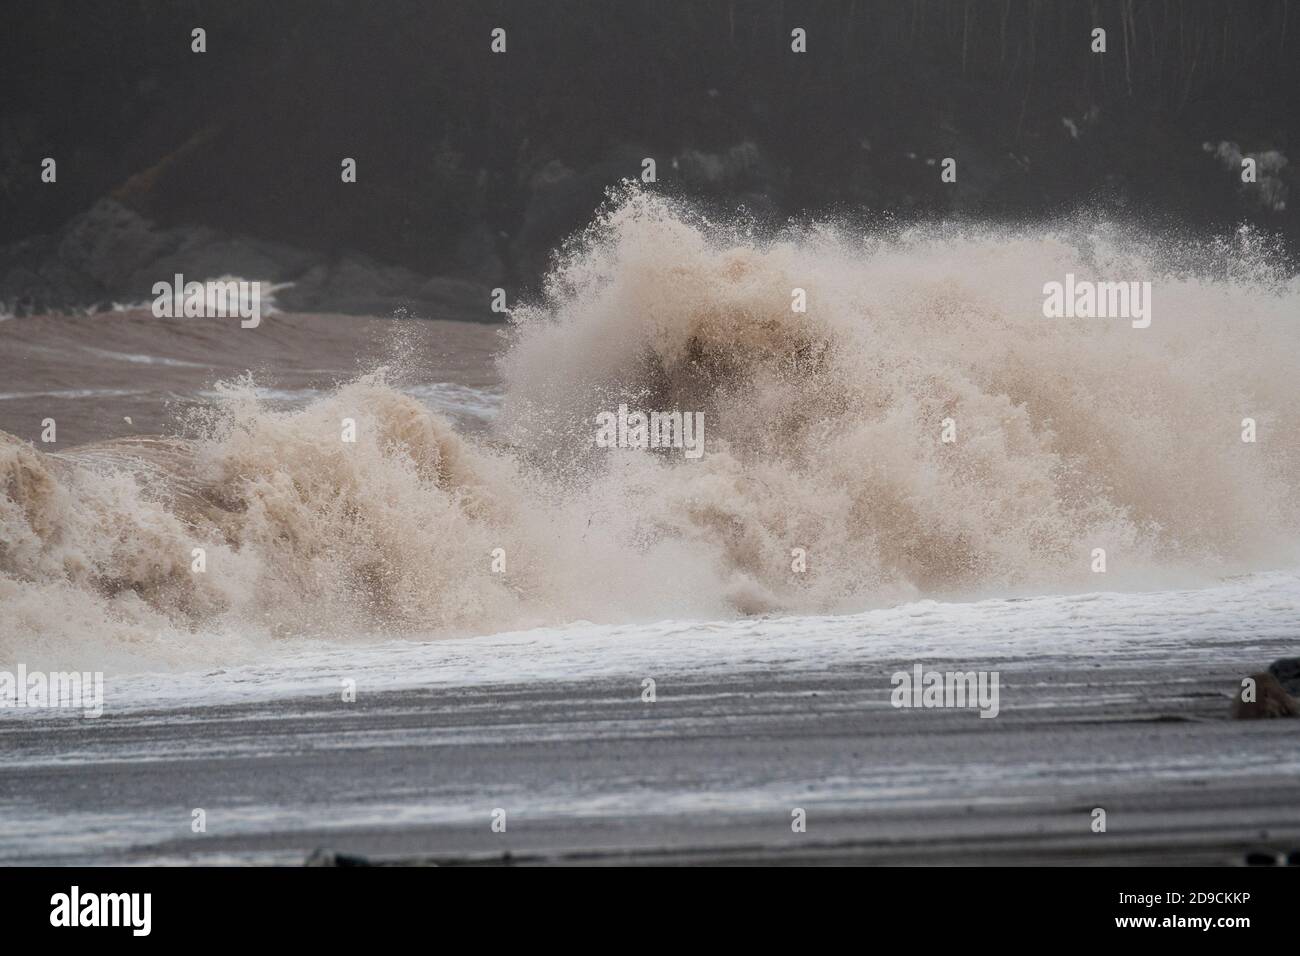 A large wave breaking on a beach durine a gale. Lots of spay and detail visible. Stock Photo